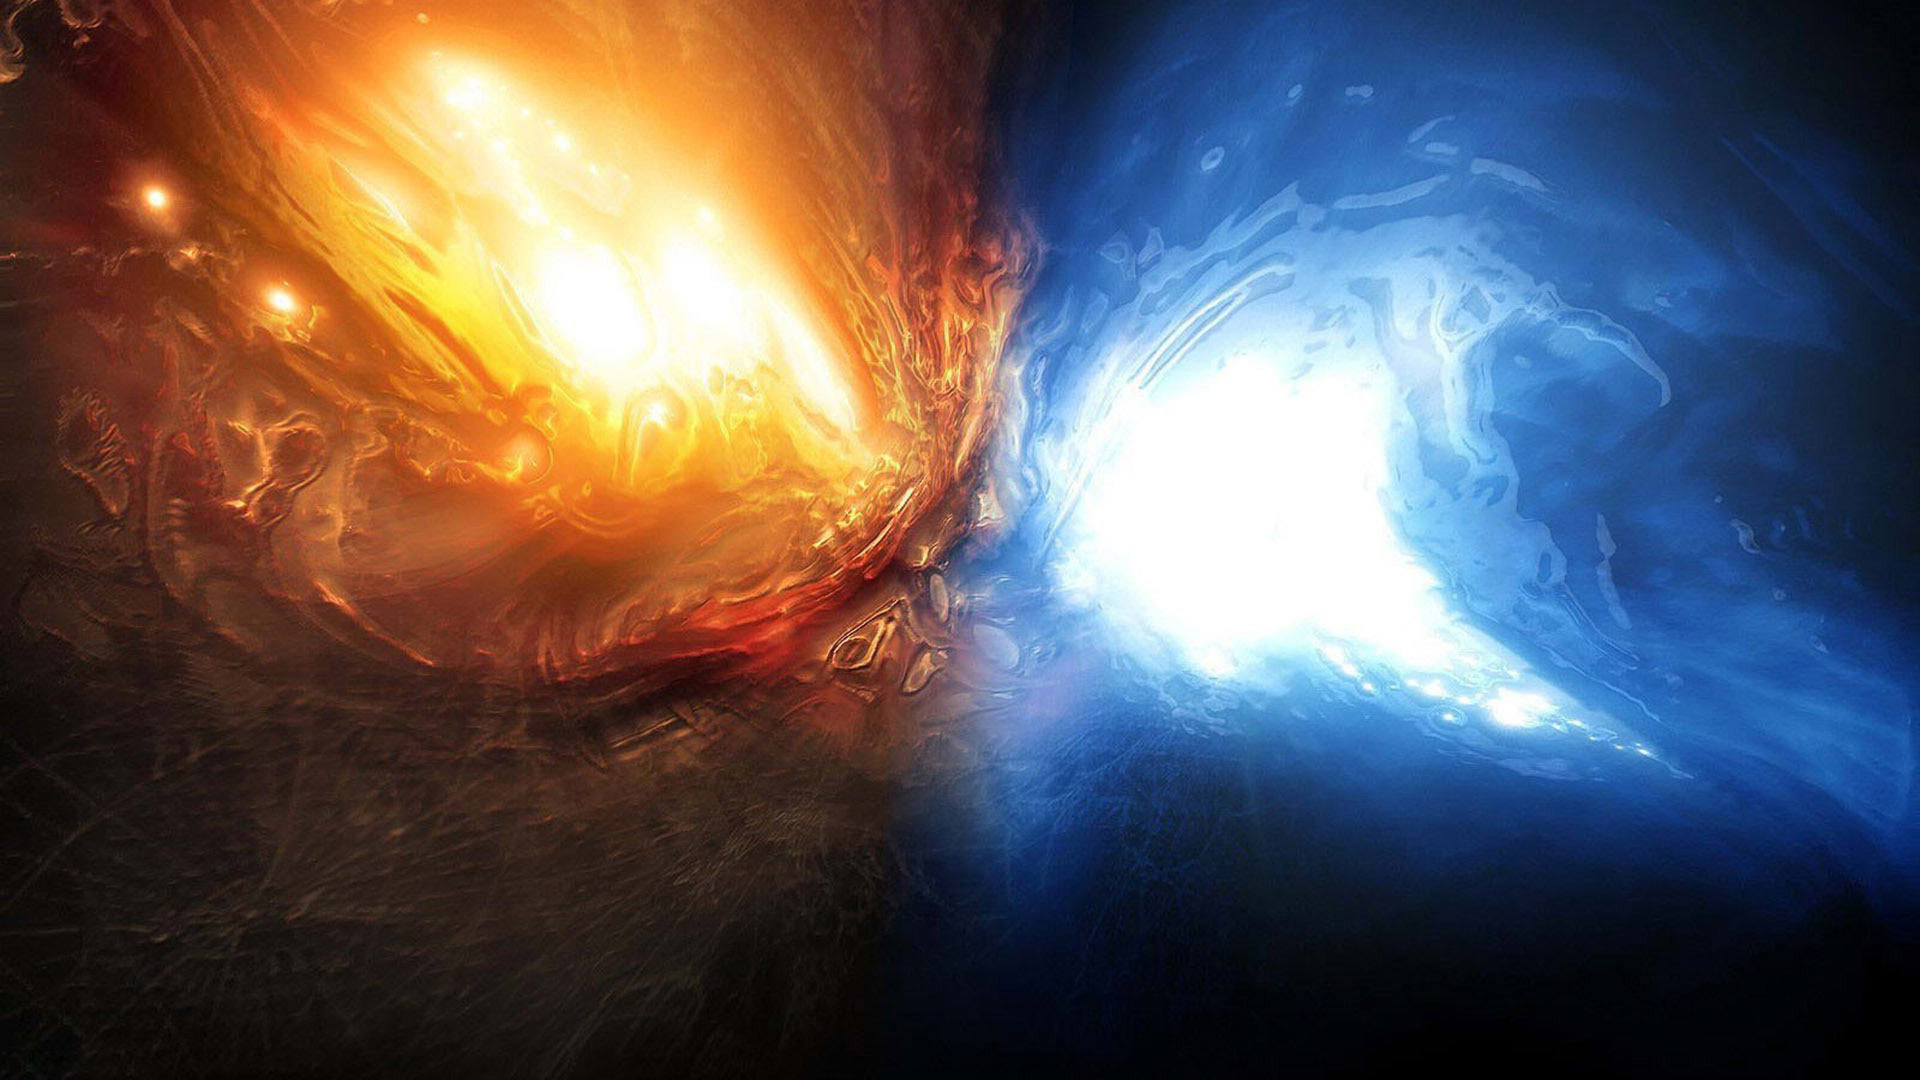 Fire Vs Ice Wallpaper - Earth Blue And Red - 1920x1080 Wallpaper 